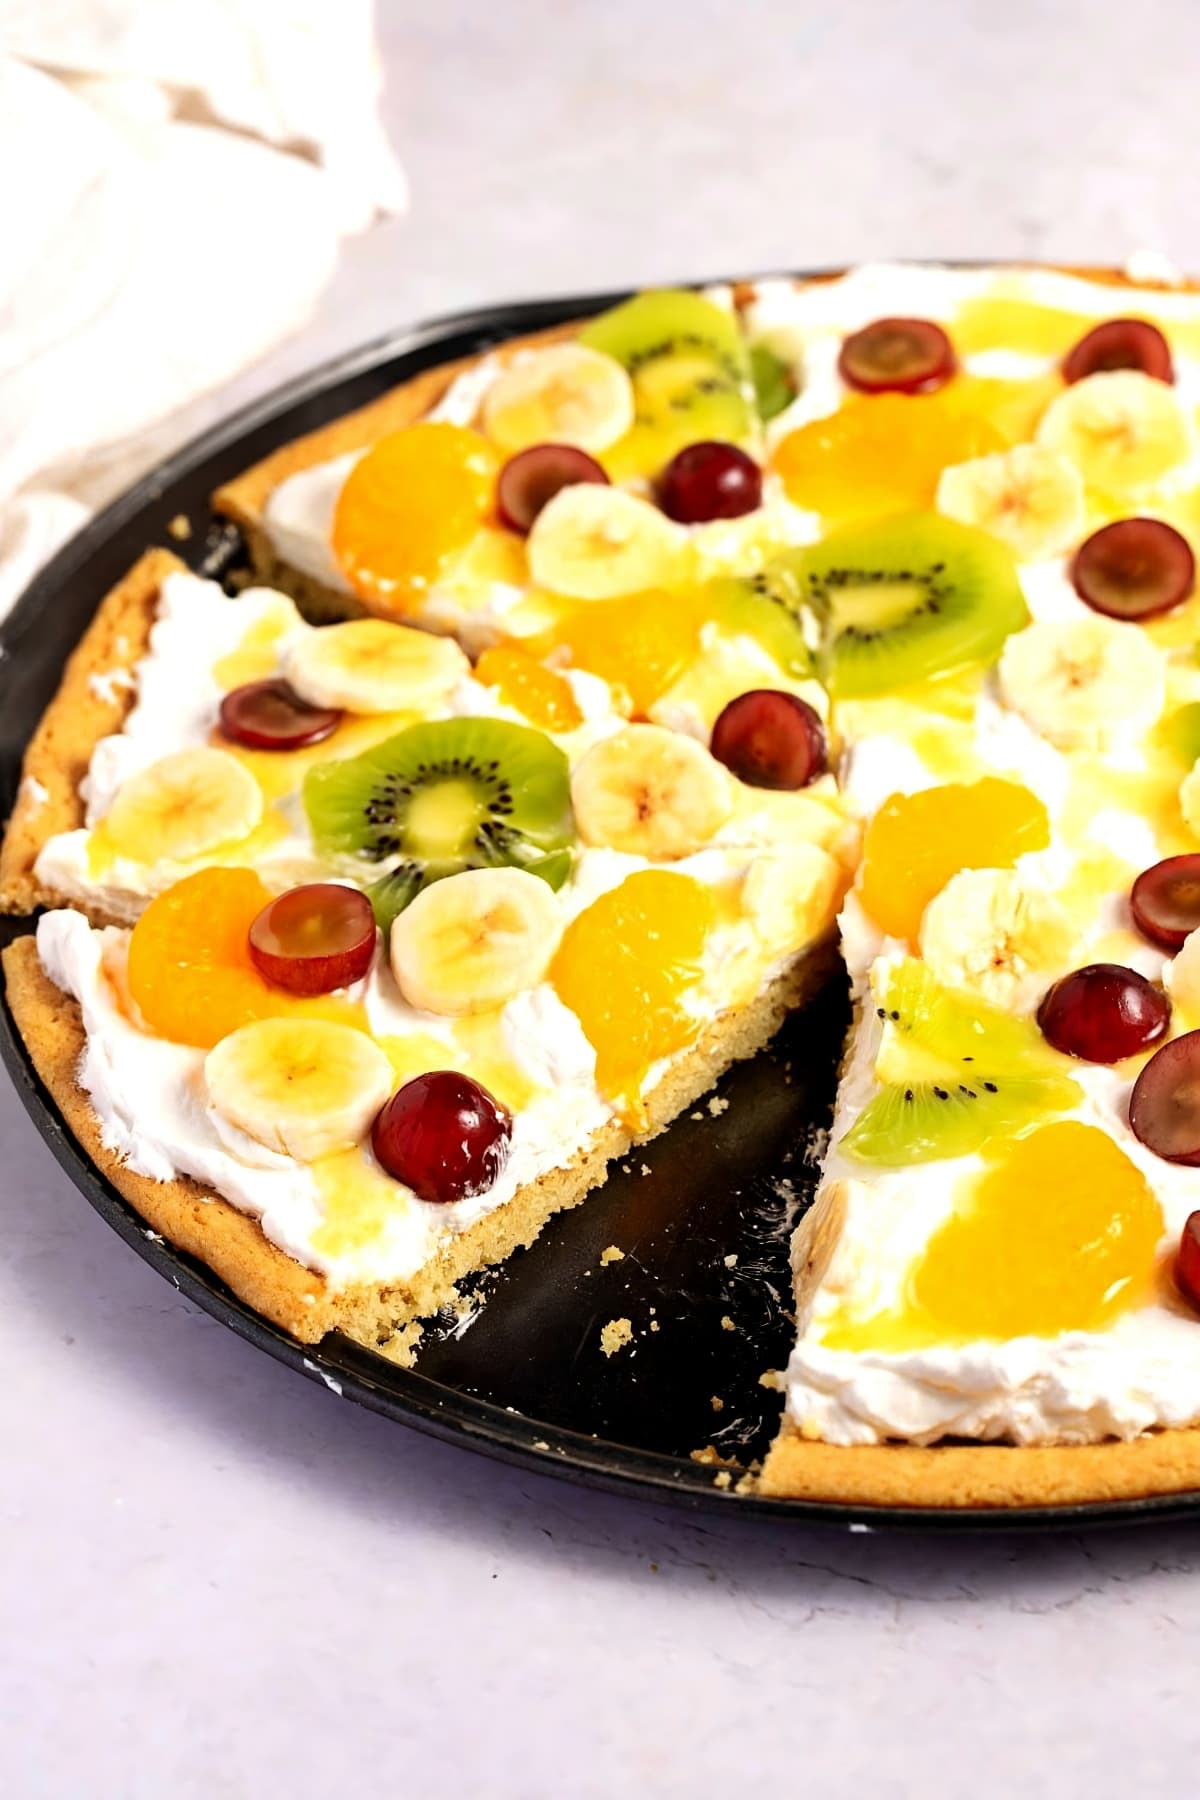 Pizza crust topped with kiwi, bananas, mandarin oranges, and grapes.